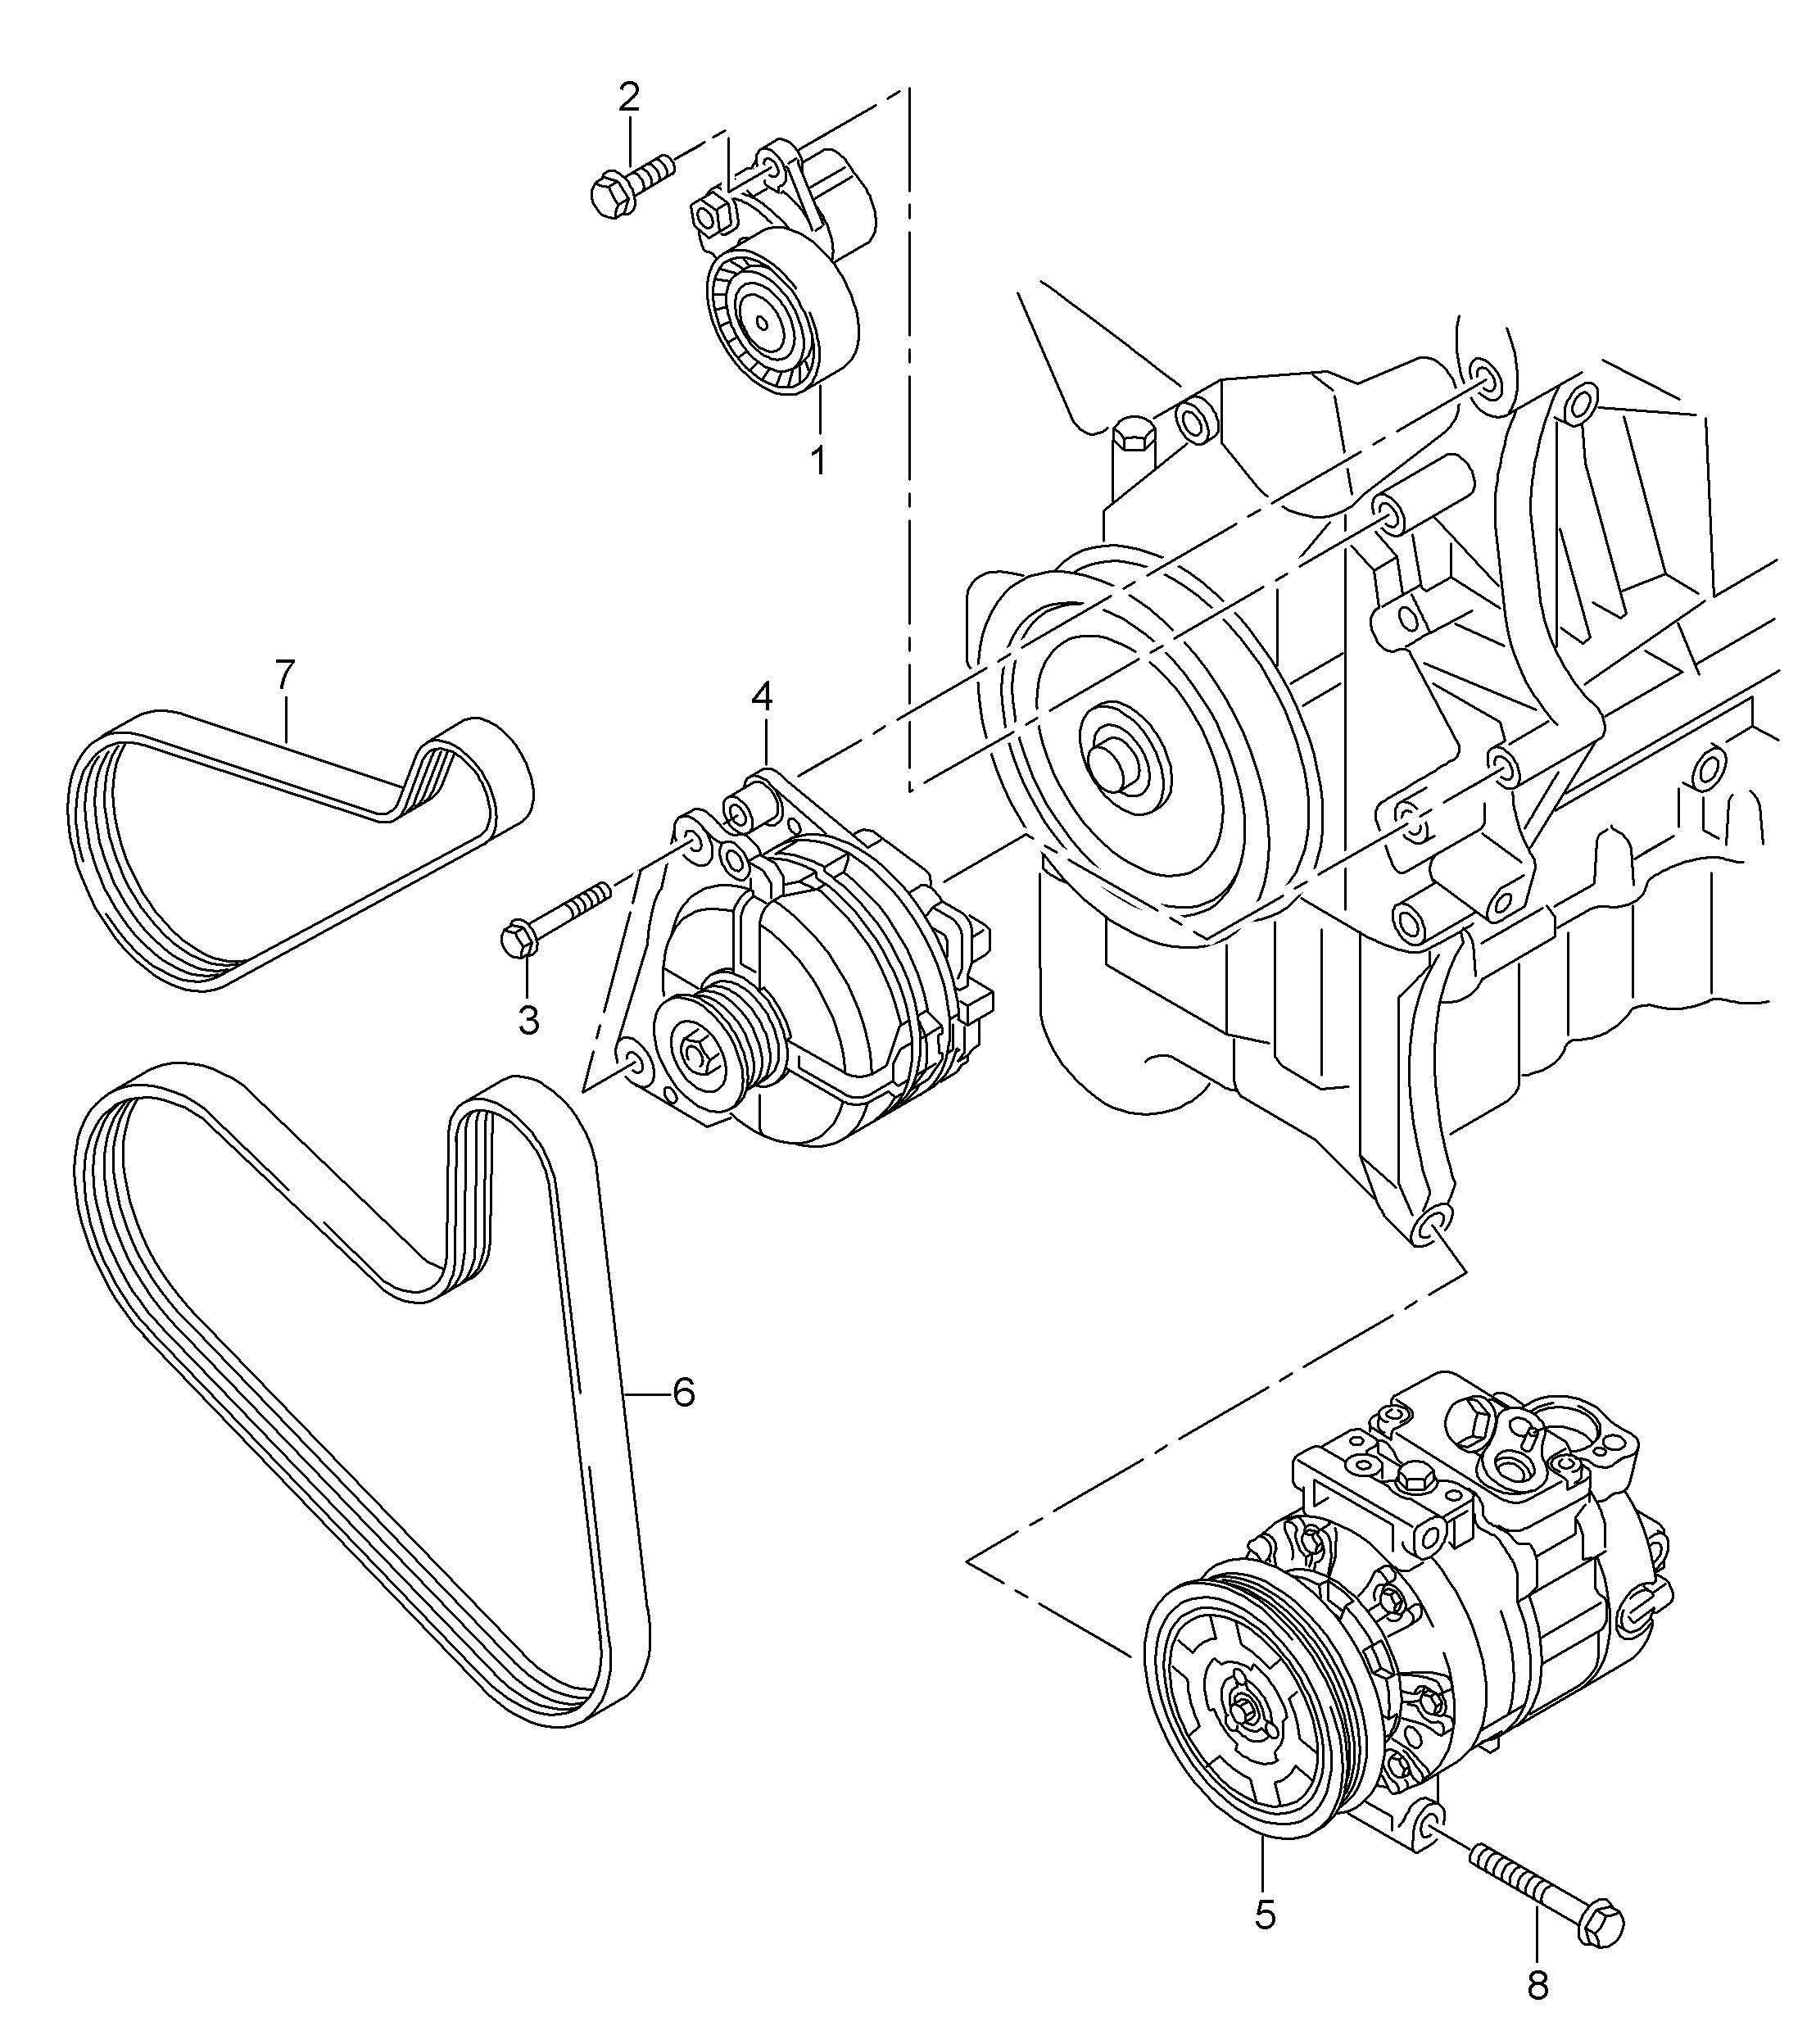 connecting and mounting parts
for alternator; pol... - Leon/Leon 4(LE)  